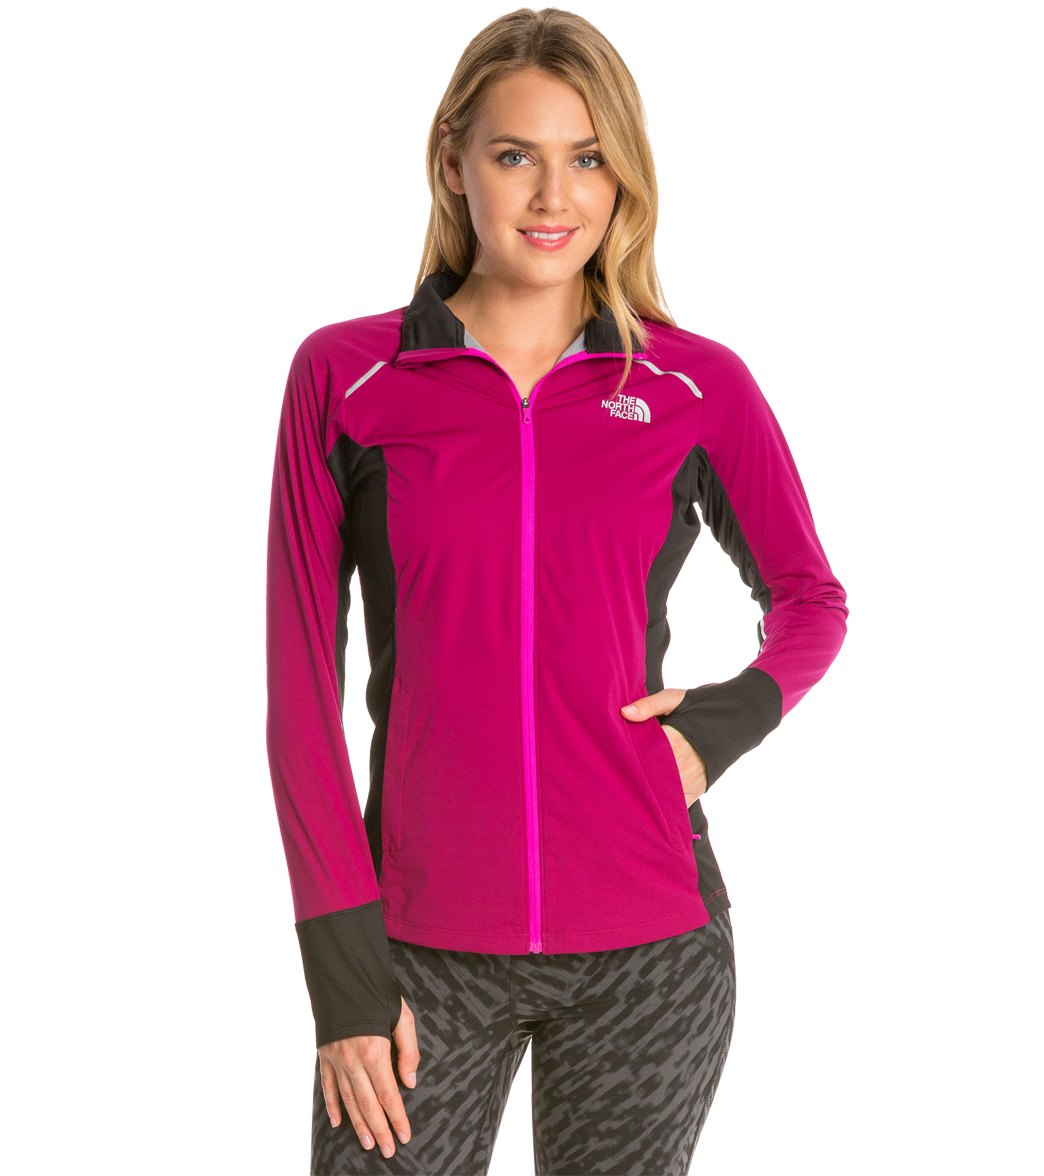 The North Face Women's Isolite Jacket - Dramatic Plum/Tnf Black Heather X-Small Polyester - Swimoutlet.com